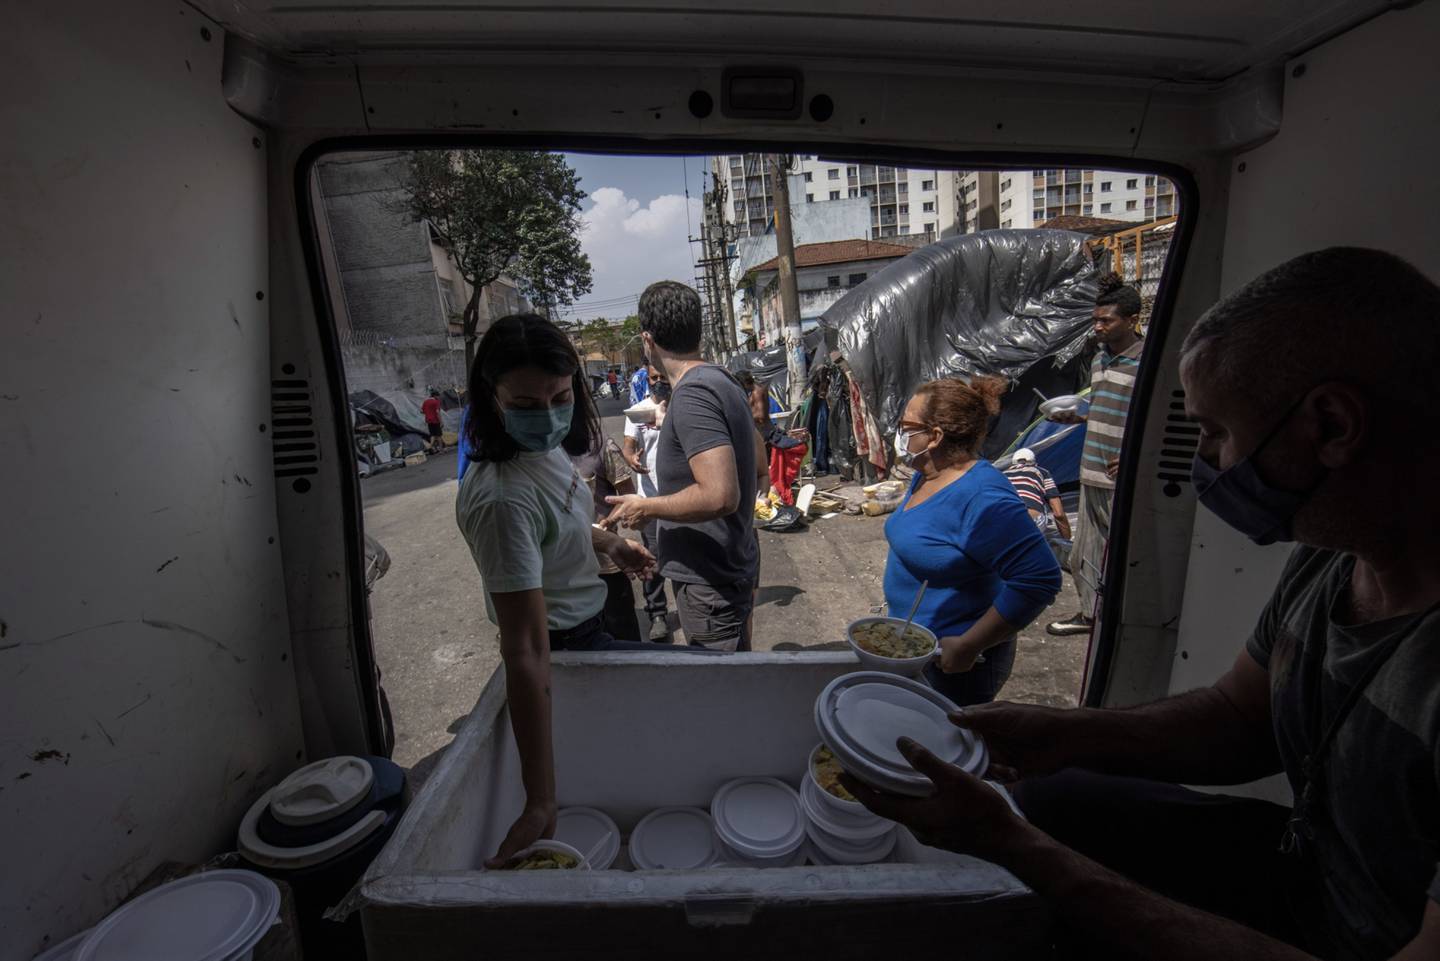 Members of the State Movement for the Homeless Population hand out food donations in Sao Paulo.dfd